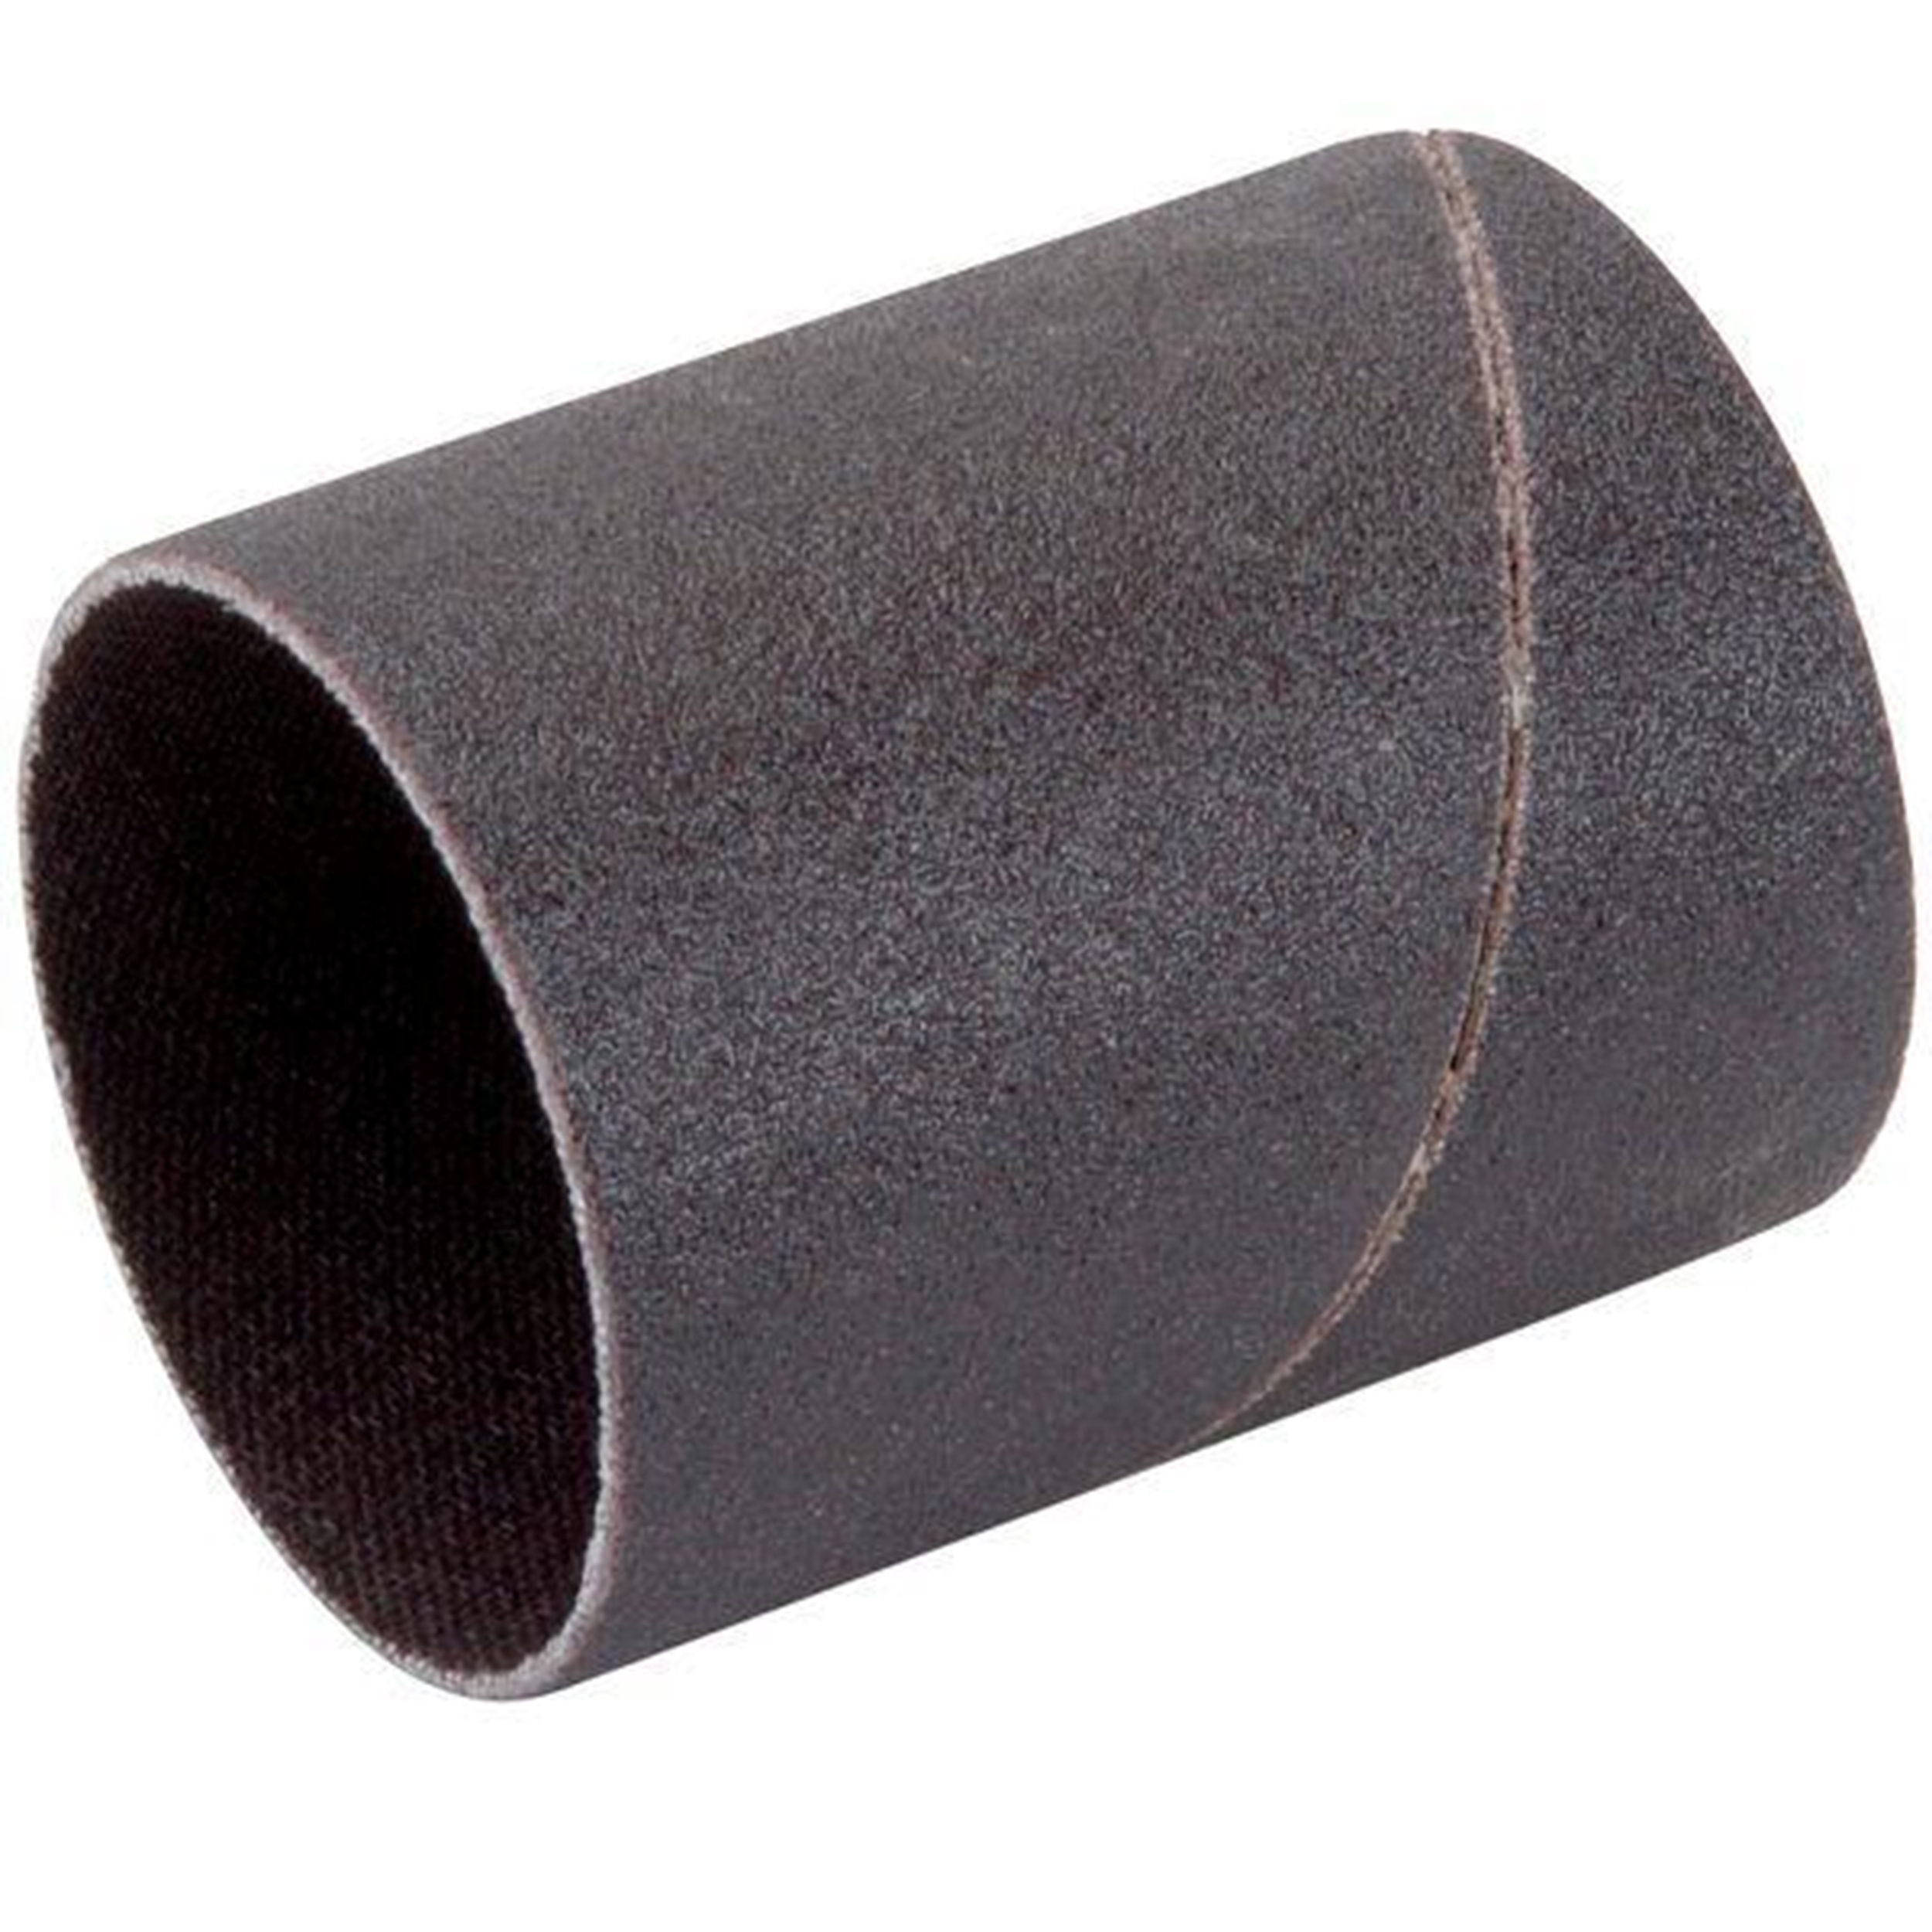 Sanding Drum Replacement Sleeve, 1-1/2" Dia. X 2" Length, 80 Grit, 12 Pack